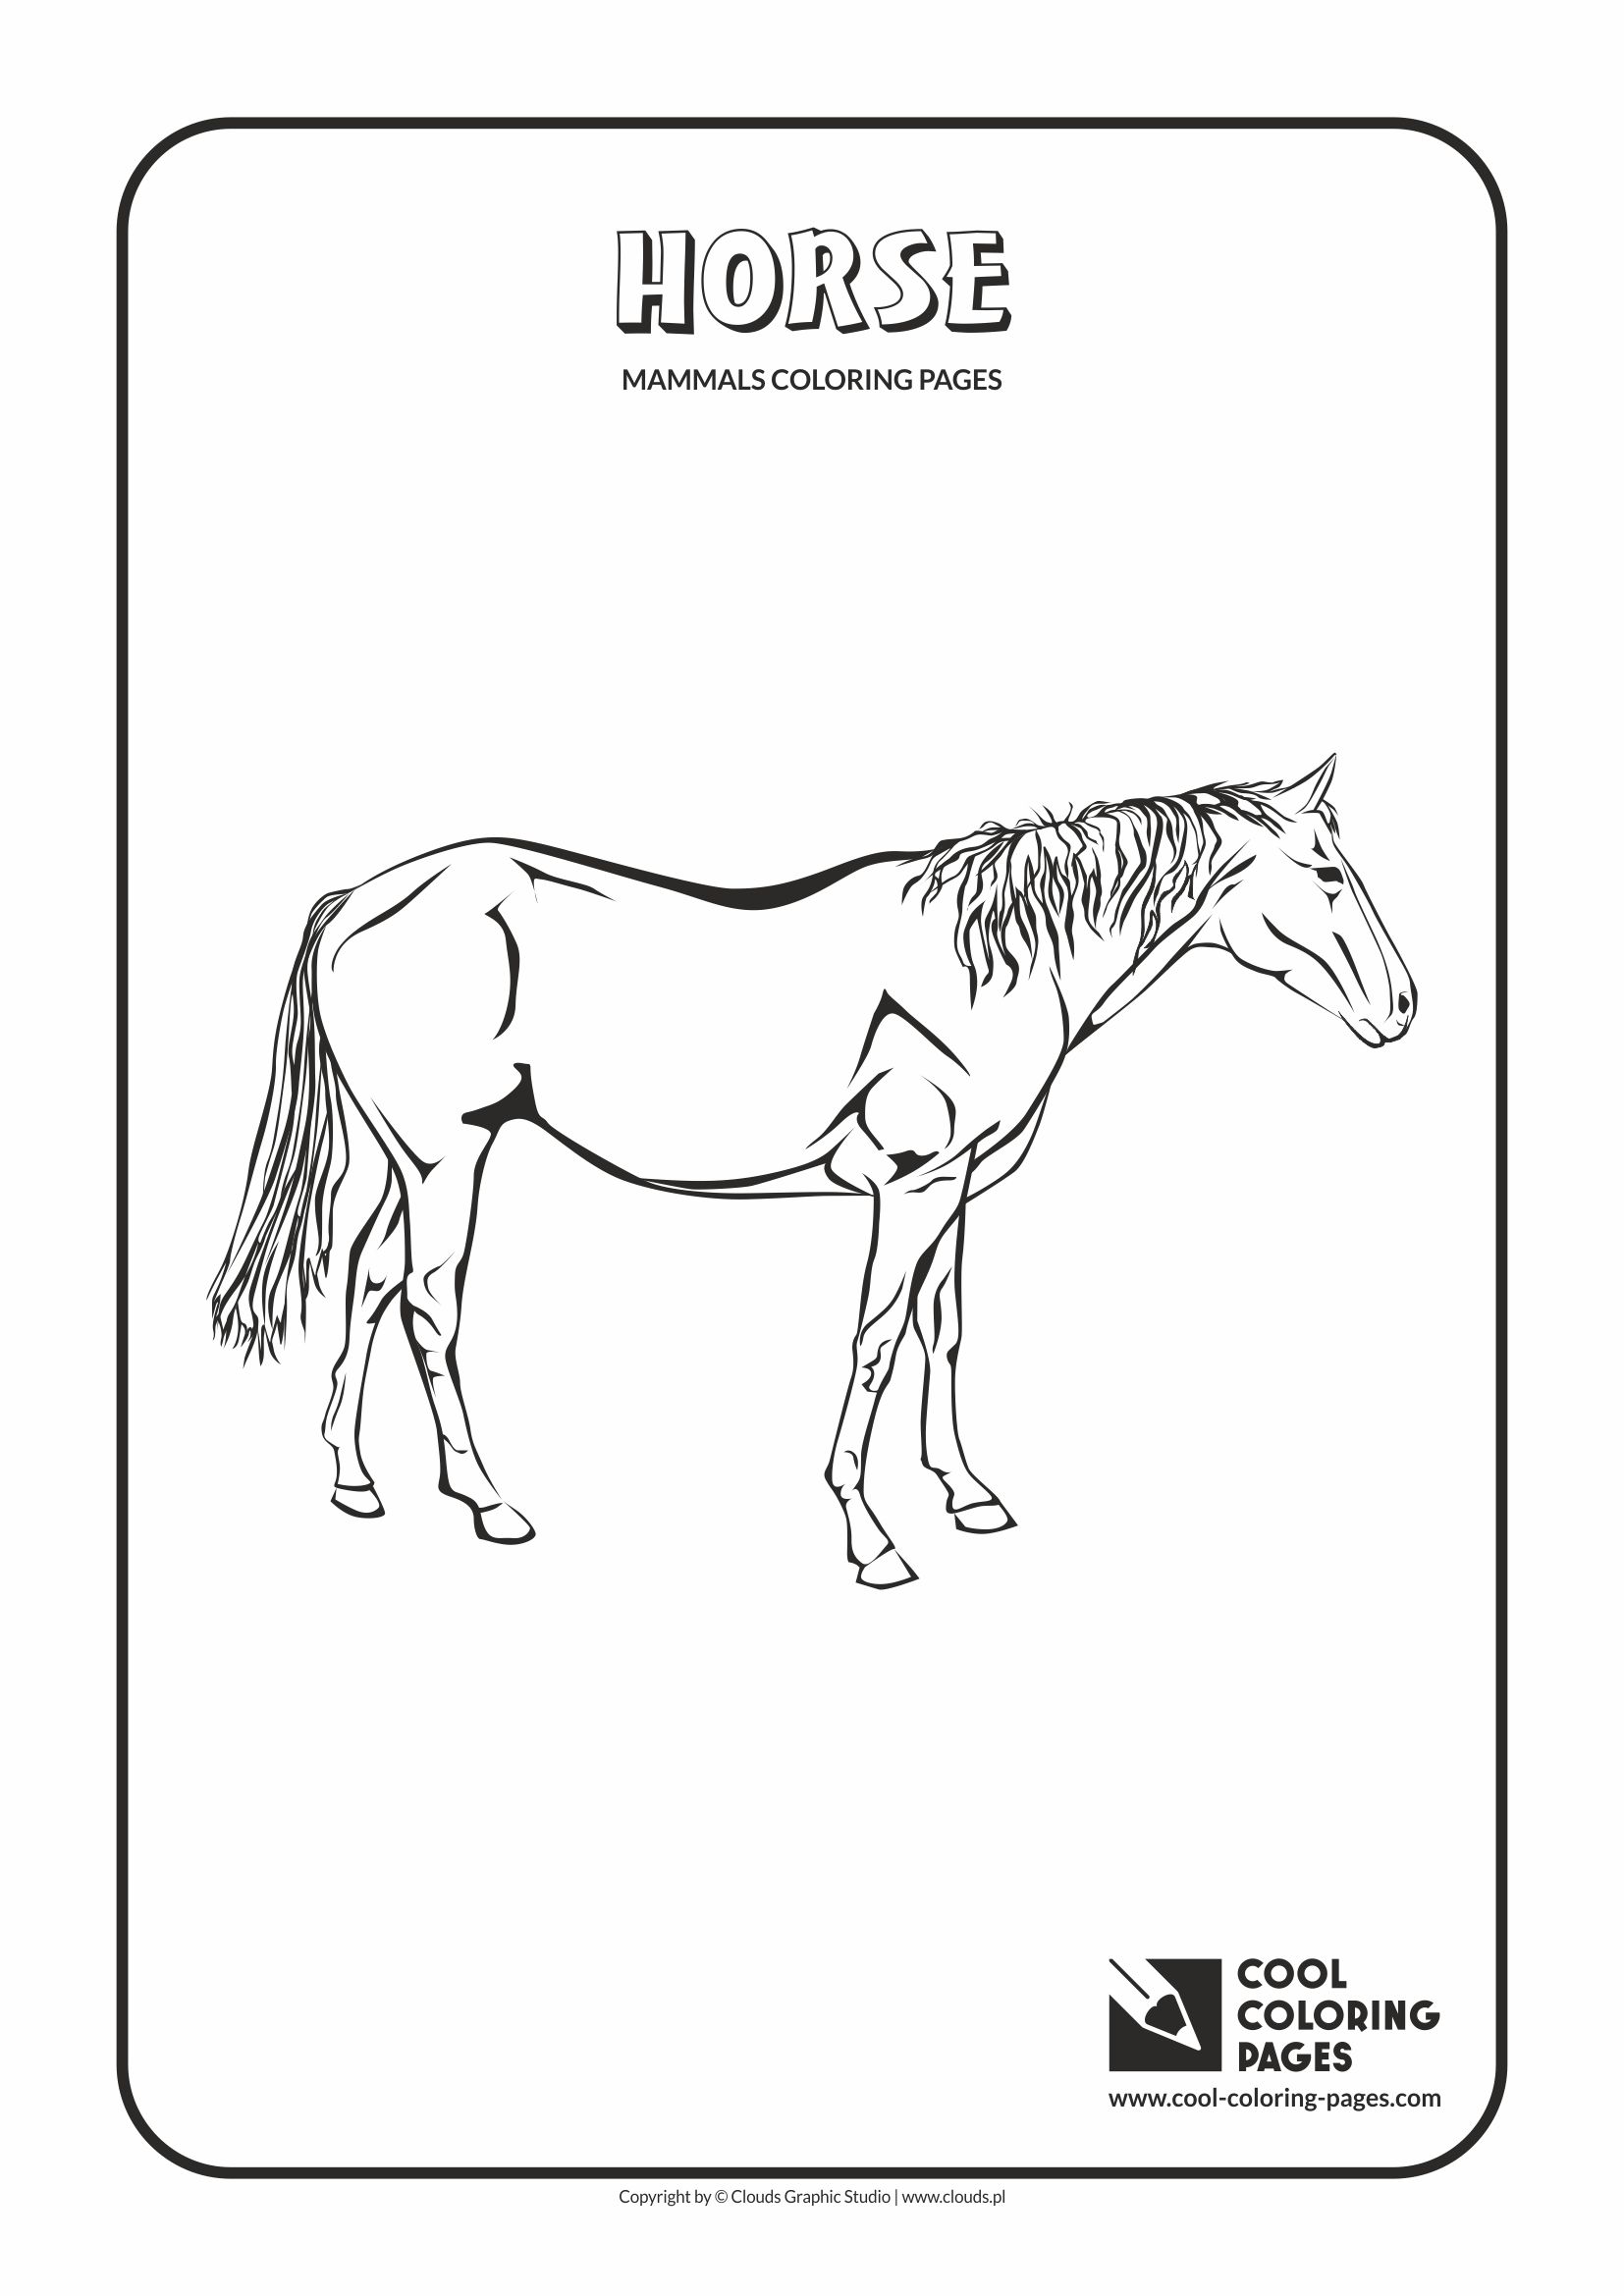 Cool Coloring Pages Mammals coloring pages - Cool Coloring Pages | Free